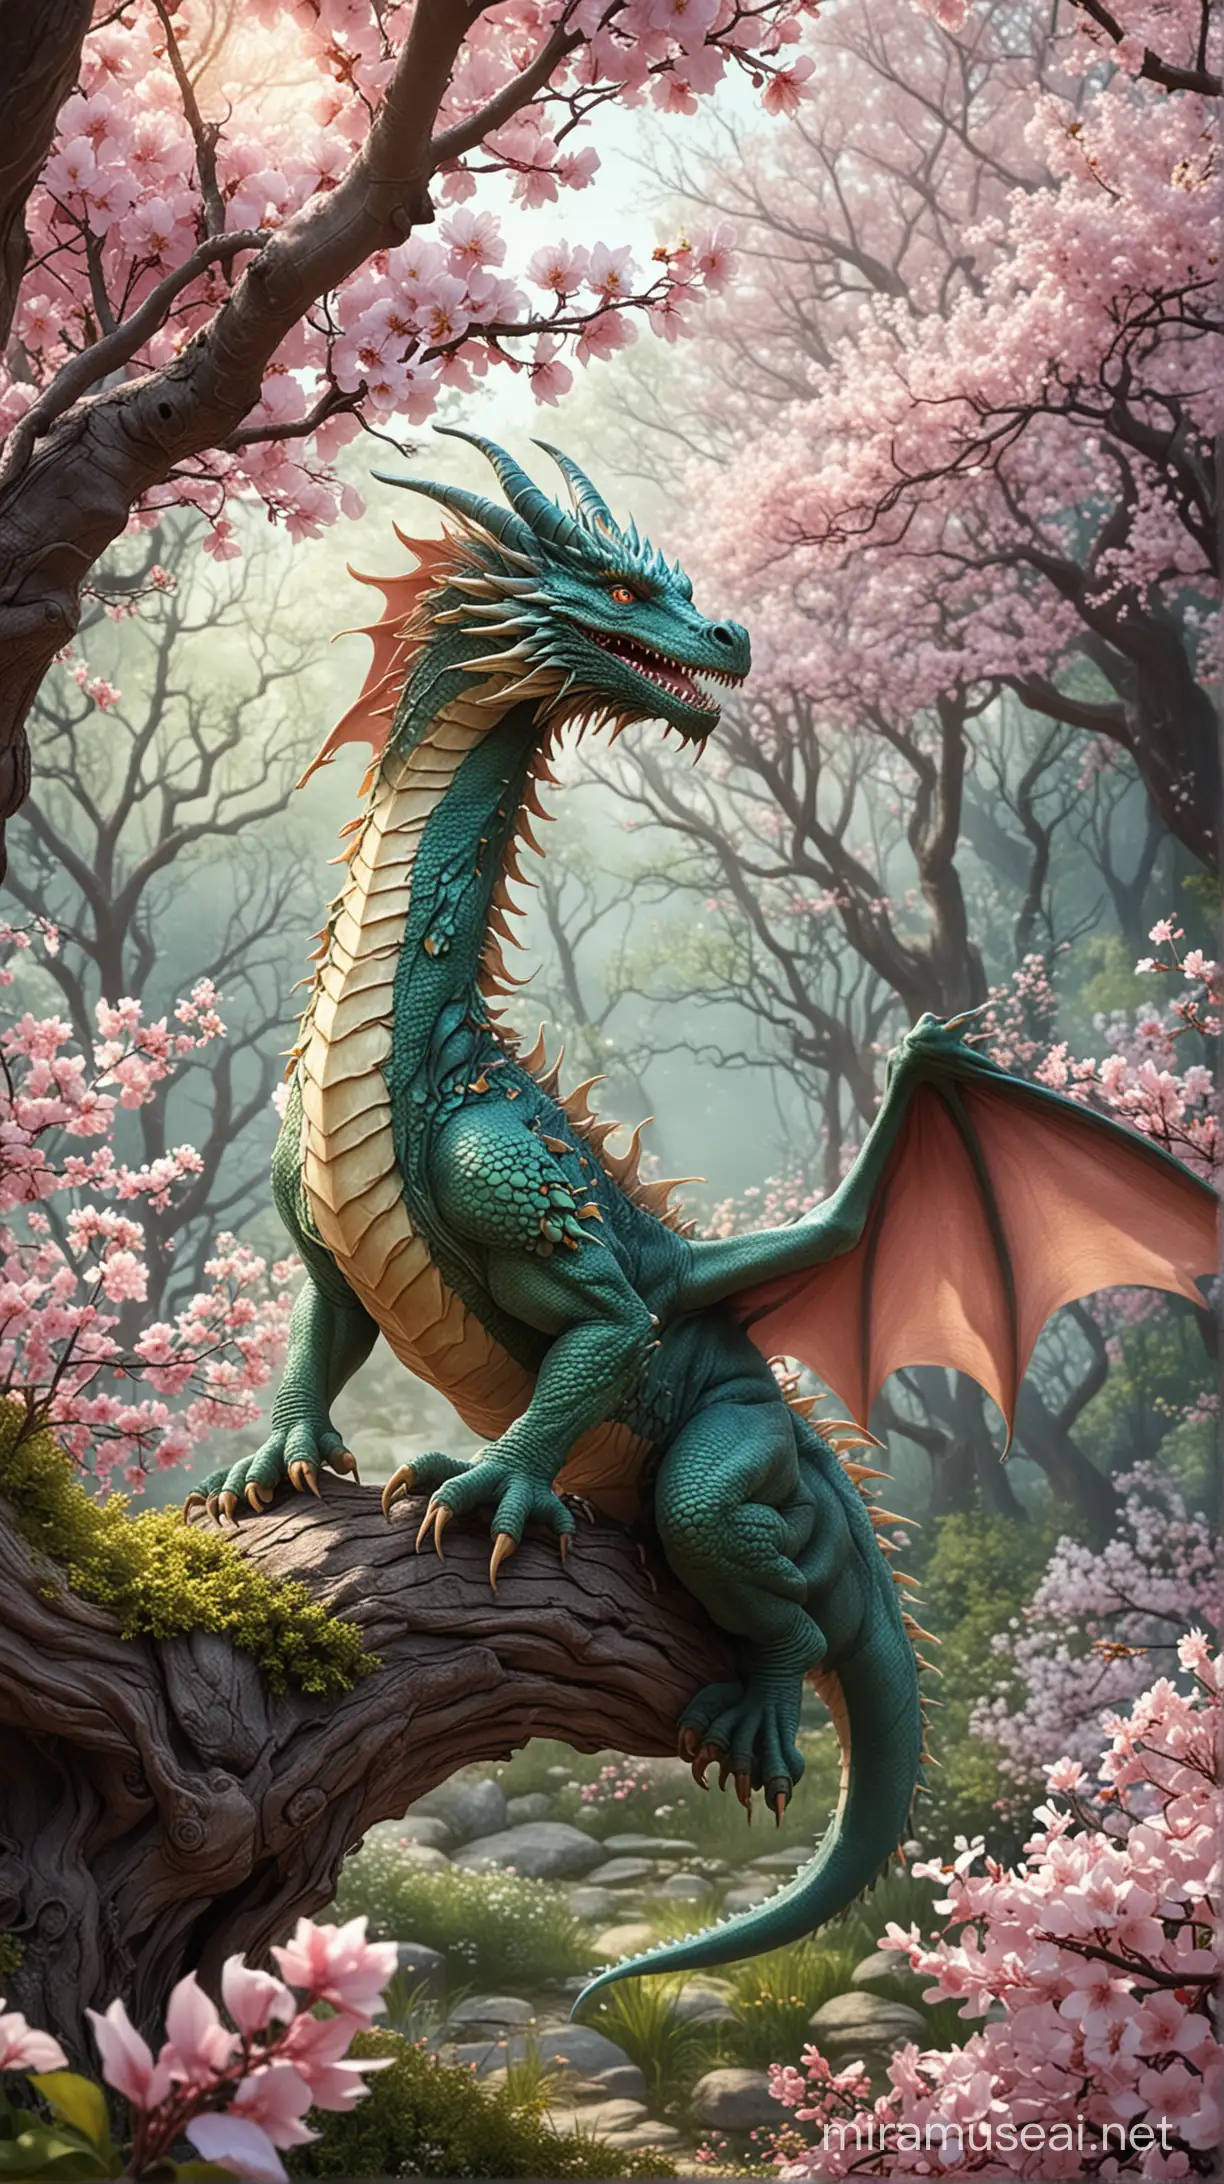 Realistic Fairy Tale Dragon in Spring Forest with Blooming Trees